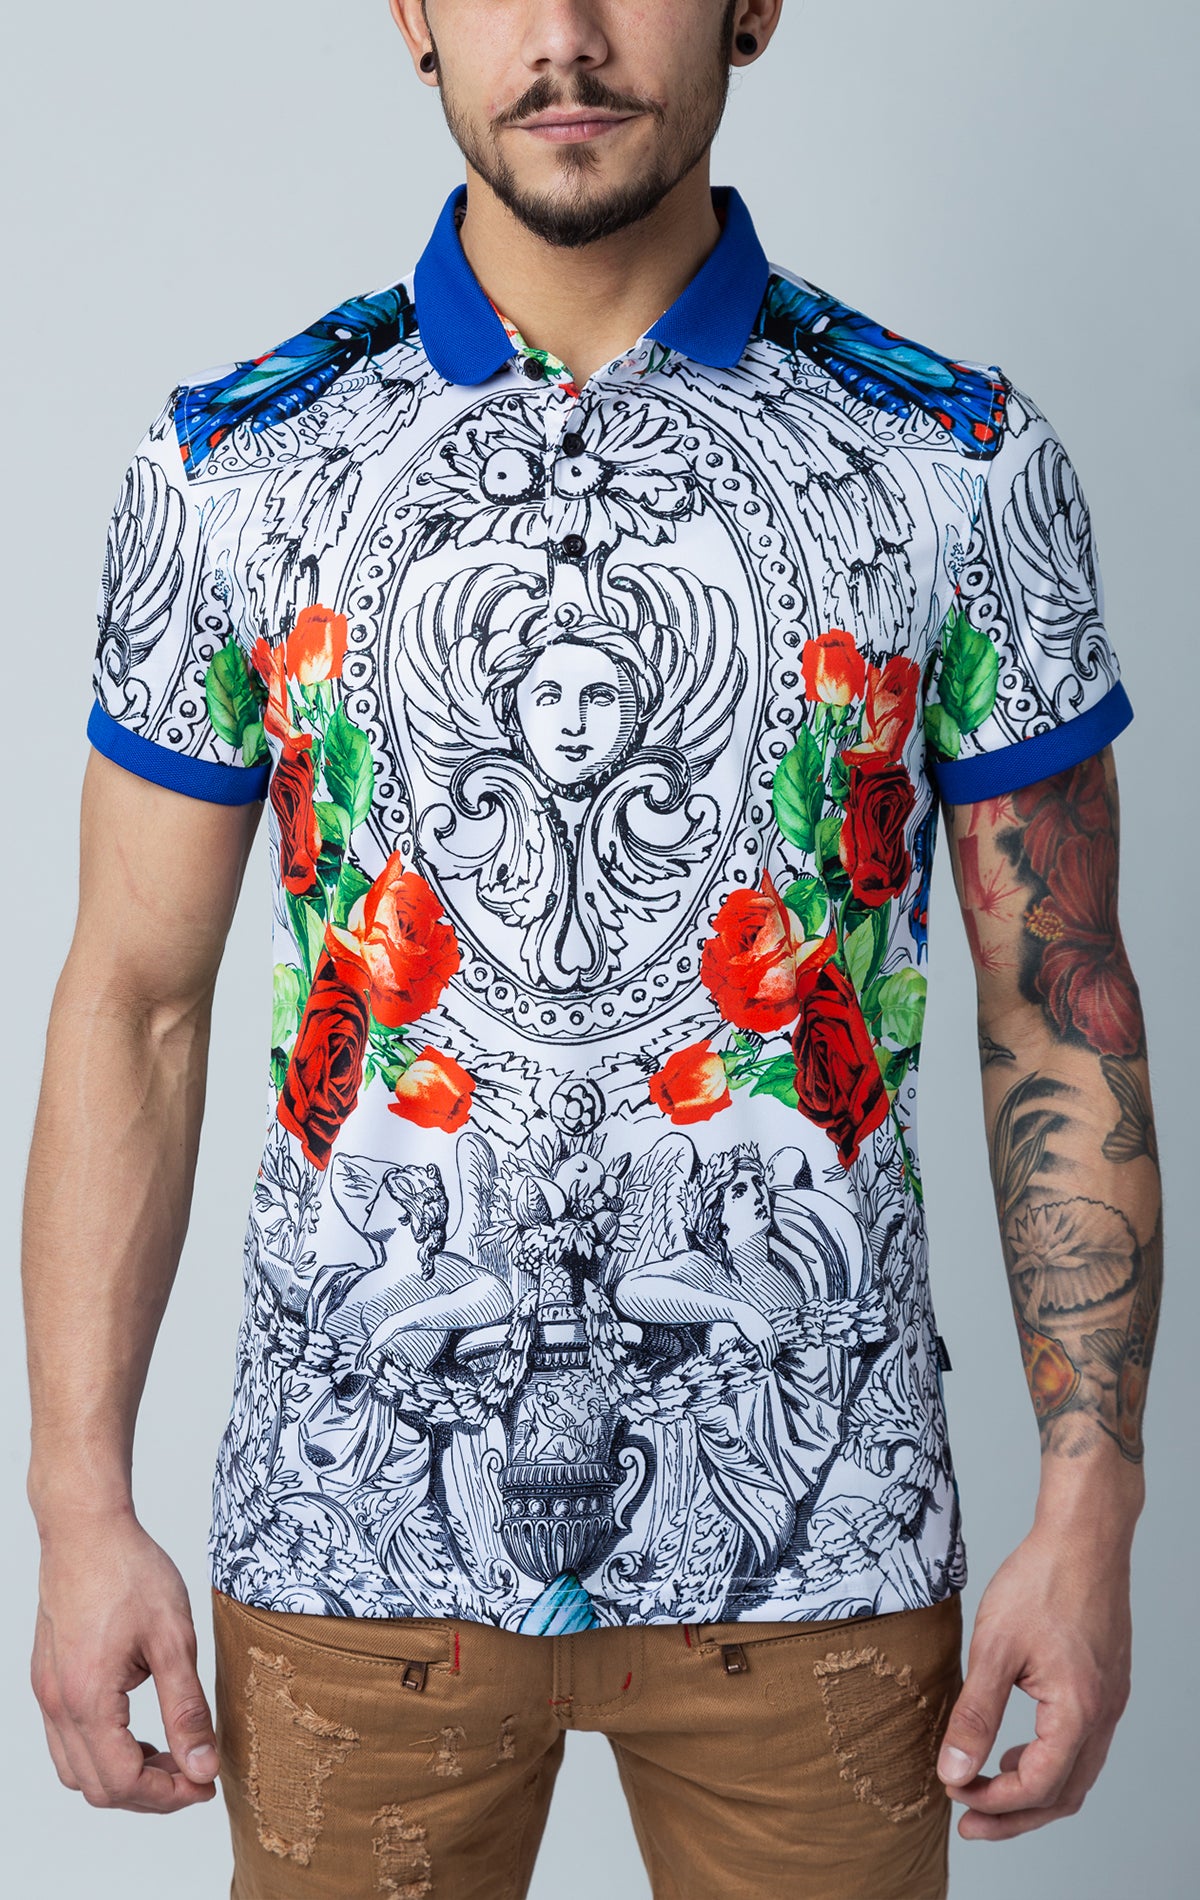 Men's printed Medusa, floral, and animal pattern short-sleeve polo shirt with contrasting royal collar and three-button closure.